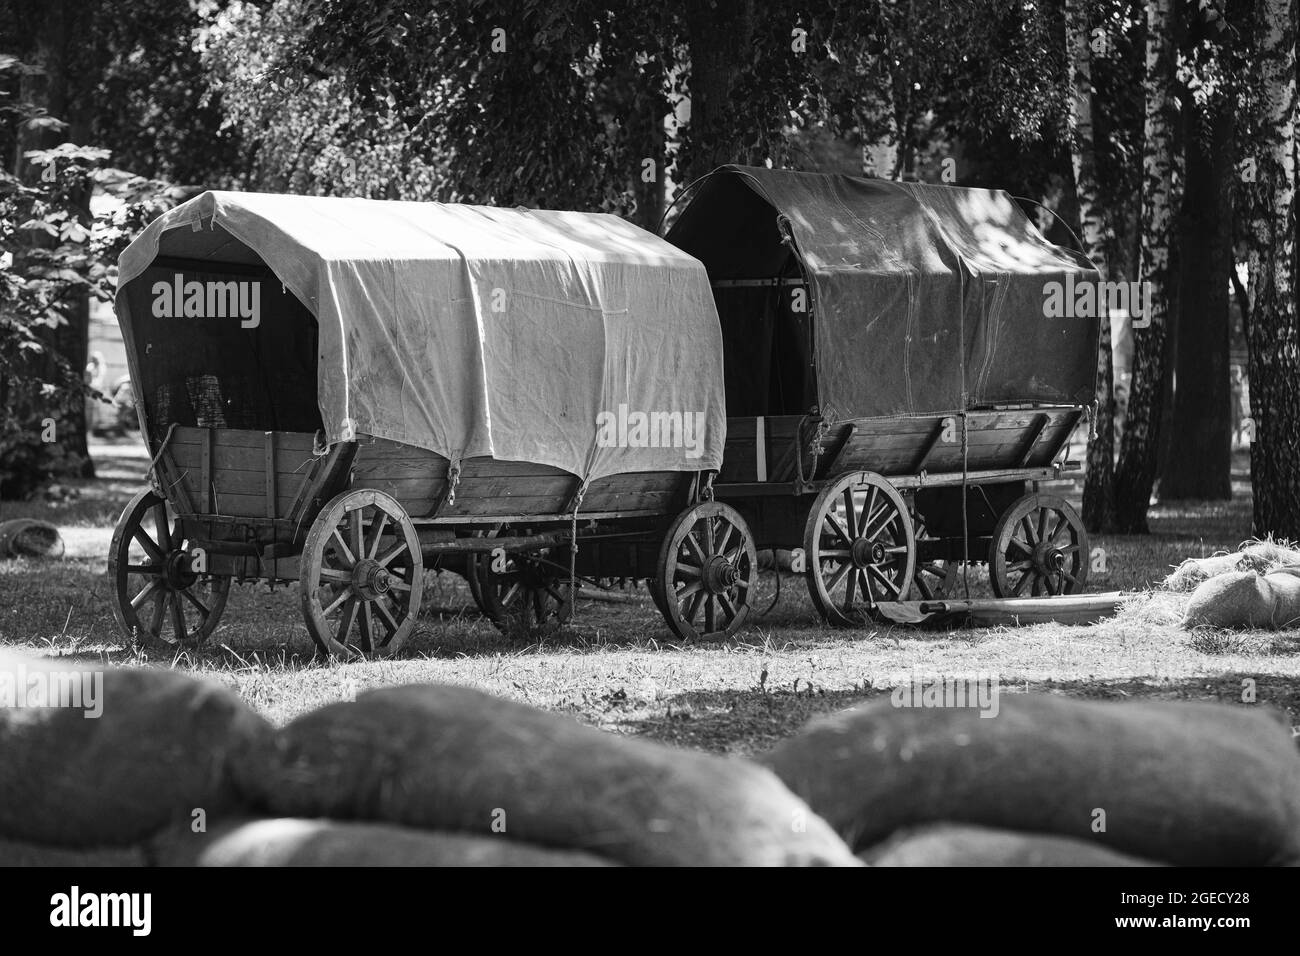 Russian Soviet World War II Peasant Carts In Forest. WWII Equipment Of Red Army Stock Photo